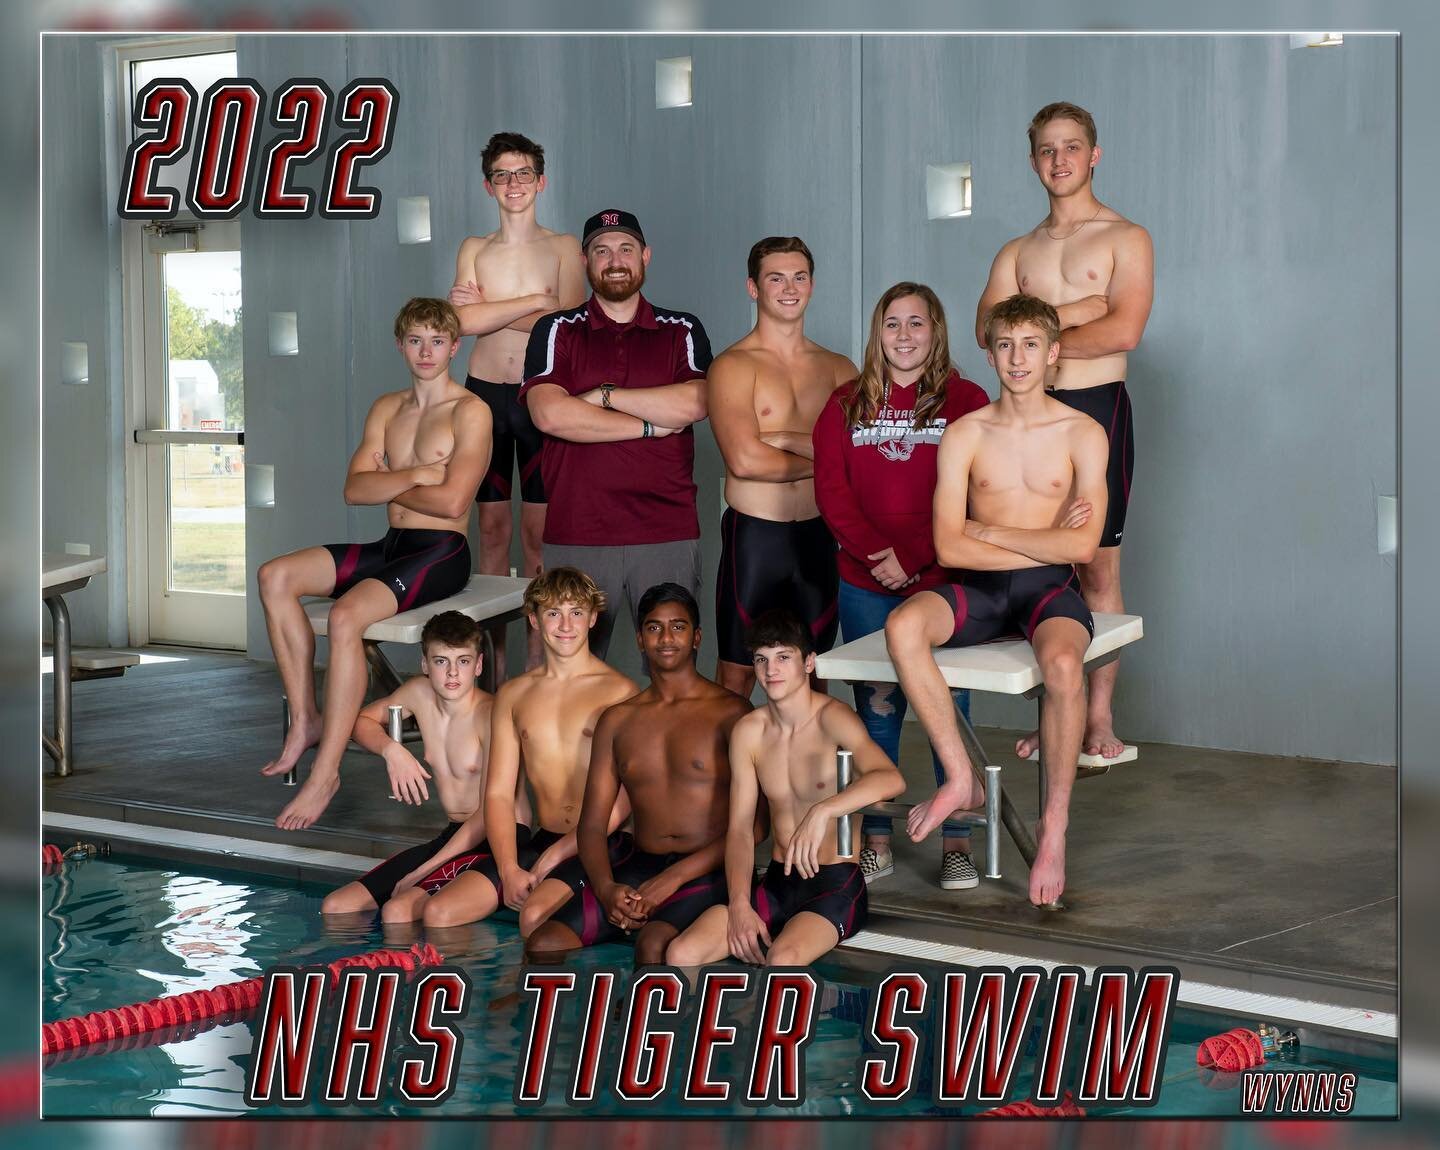 Good luck to NHS Tiger Swim at their meet today! Go Tigers! 🐅🏊🏻